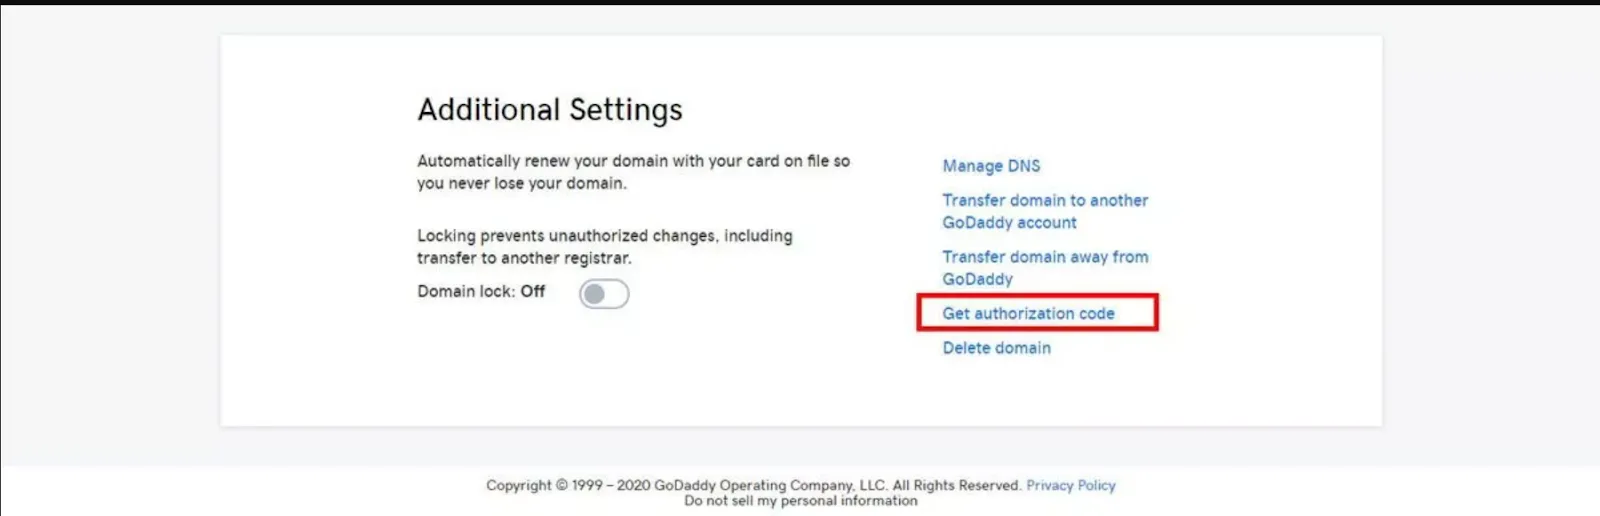 How to transfer domain from GoDaddy to Squarespace authorization code